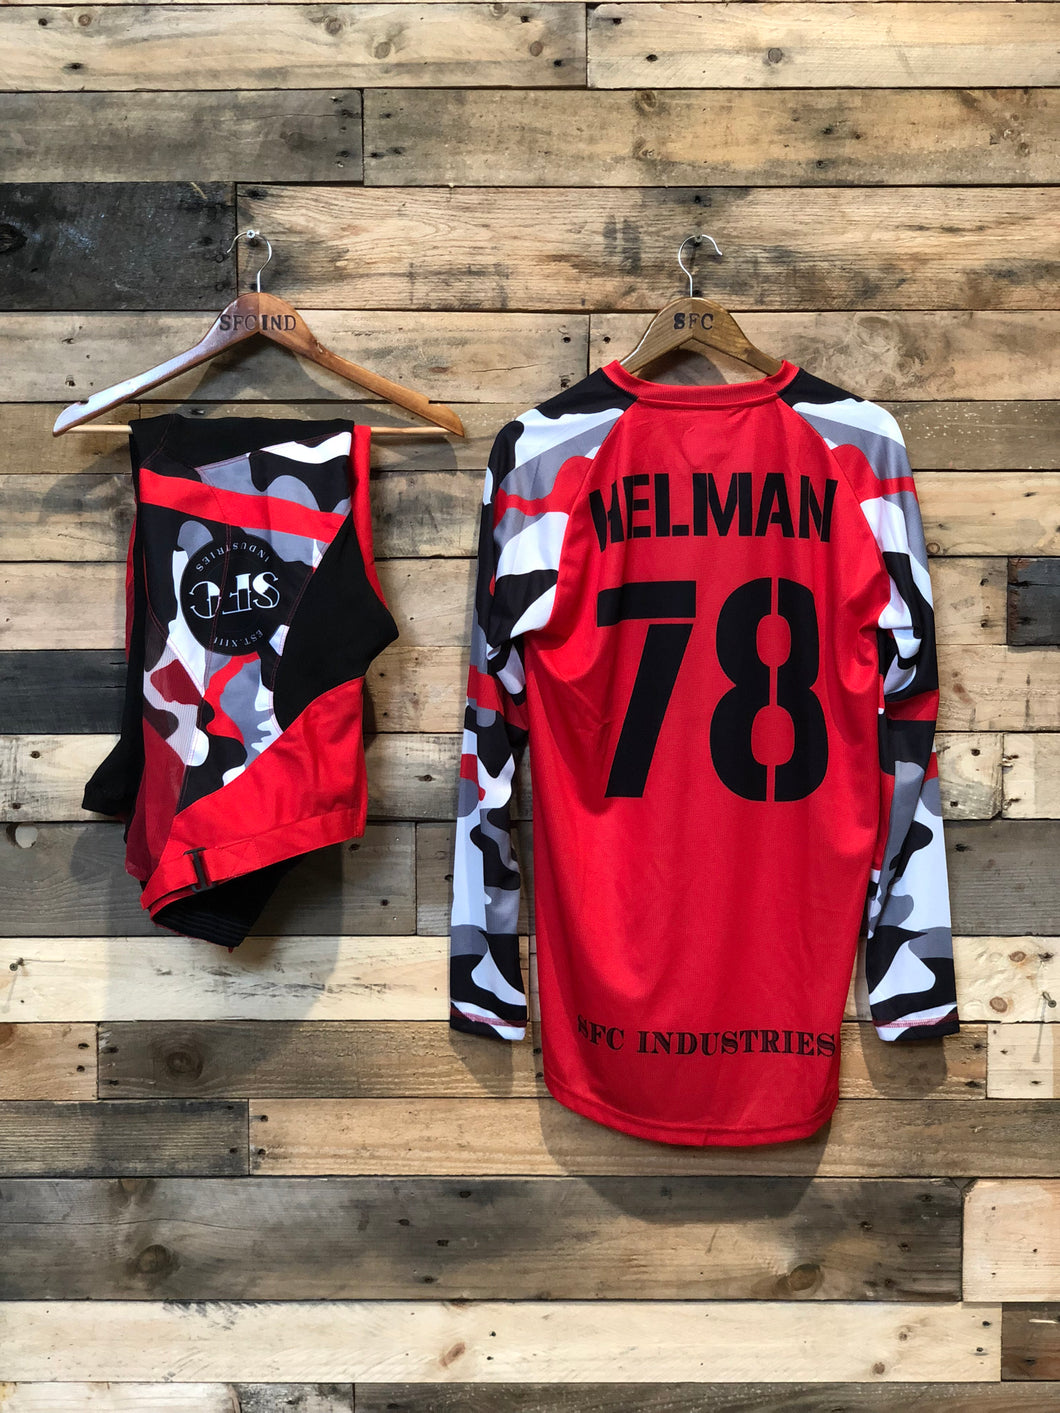 SFC INDUSTRIES RED CAMO MX JERSEY